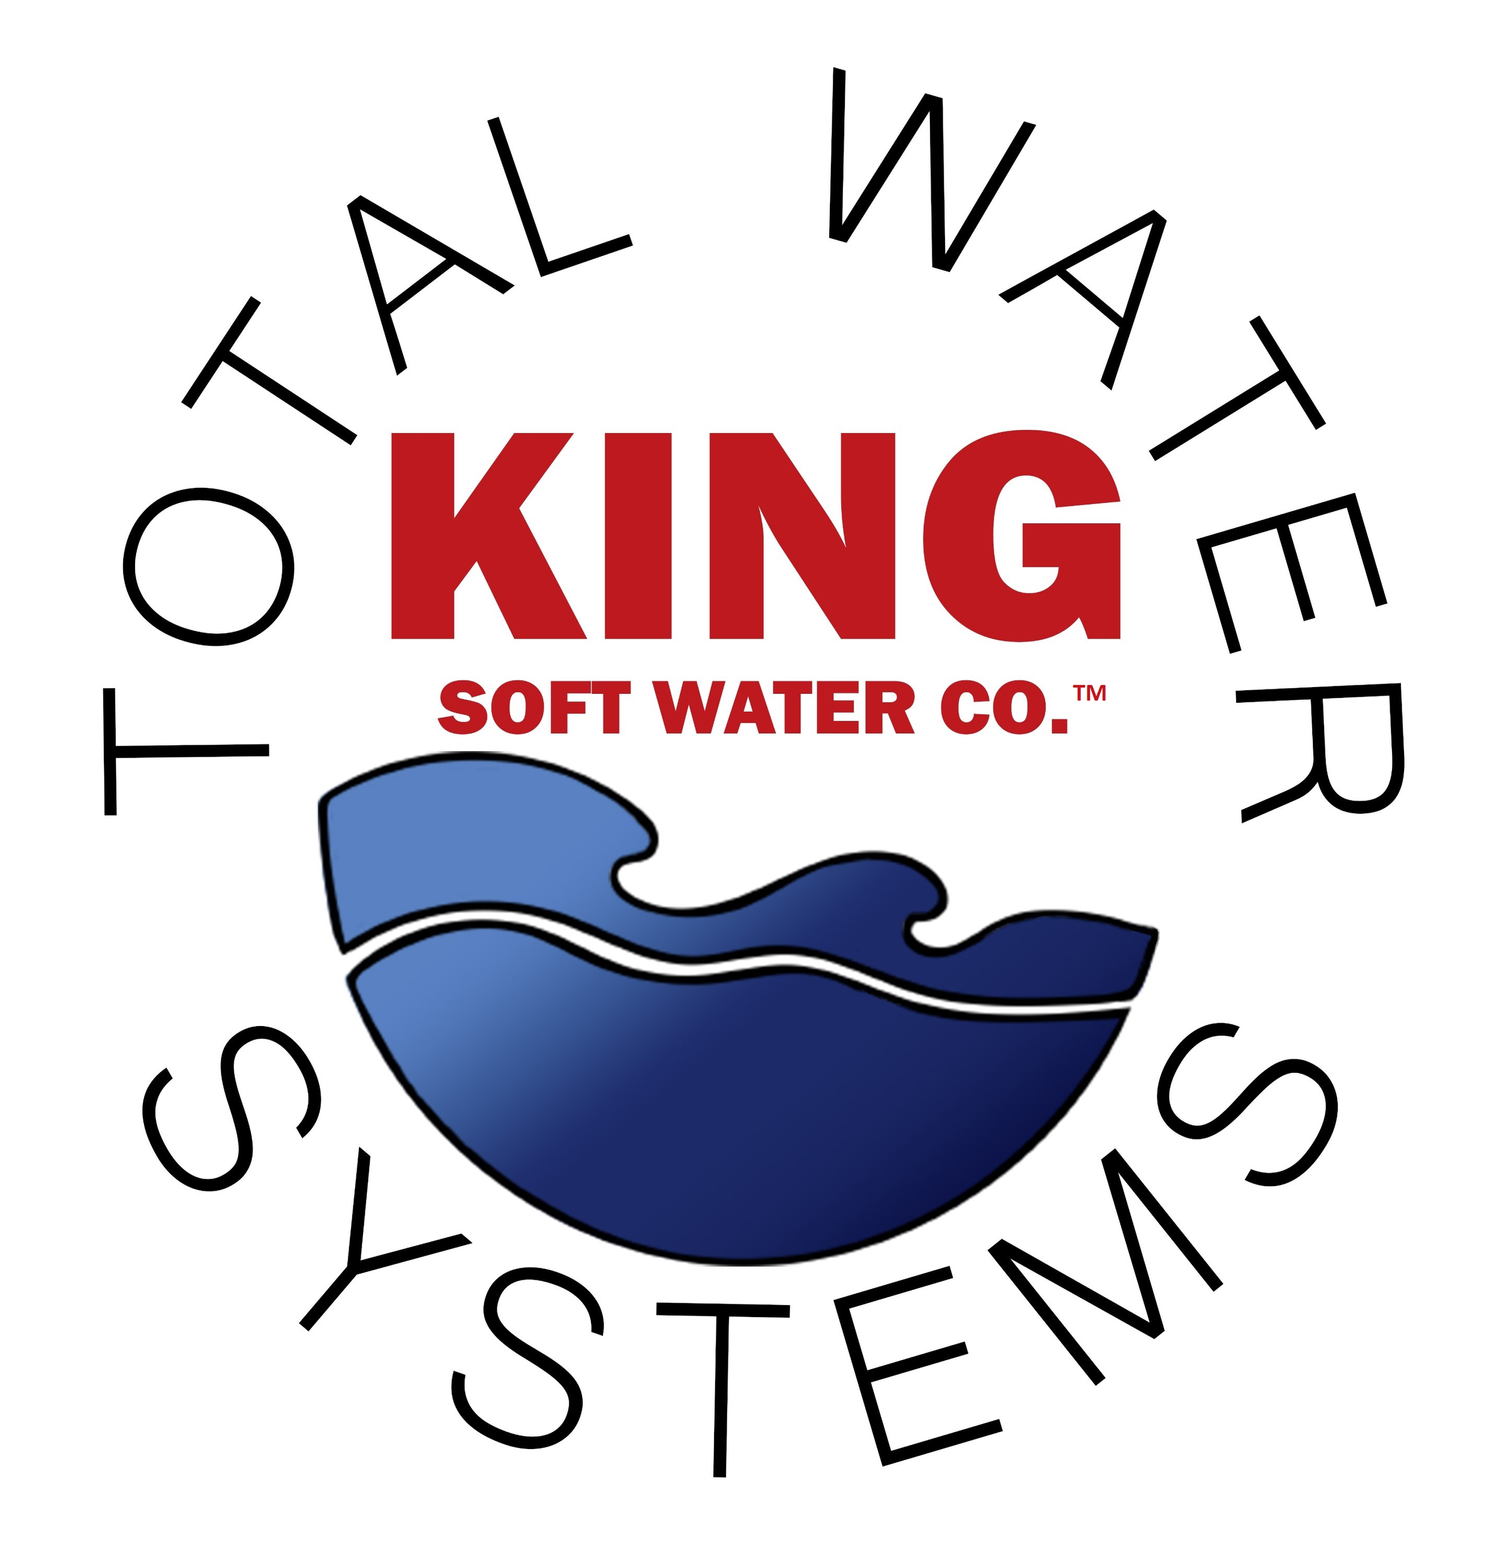 King Soft Water Co.™  